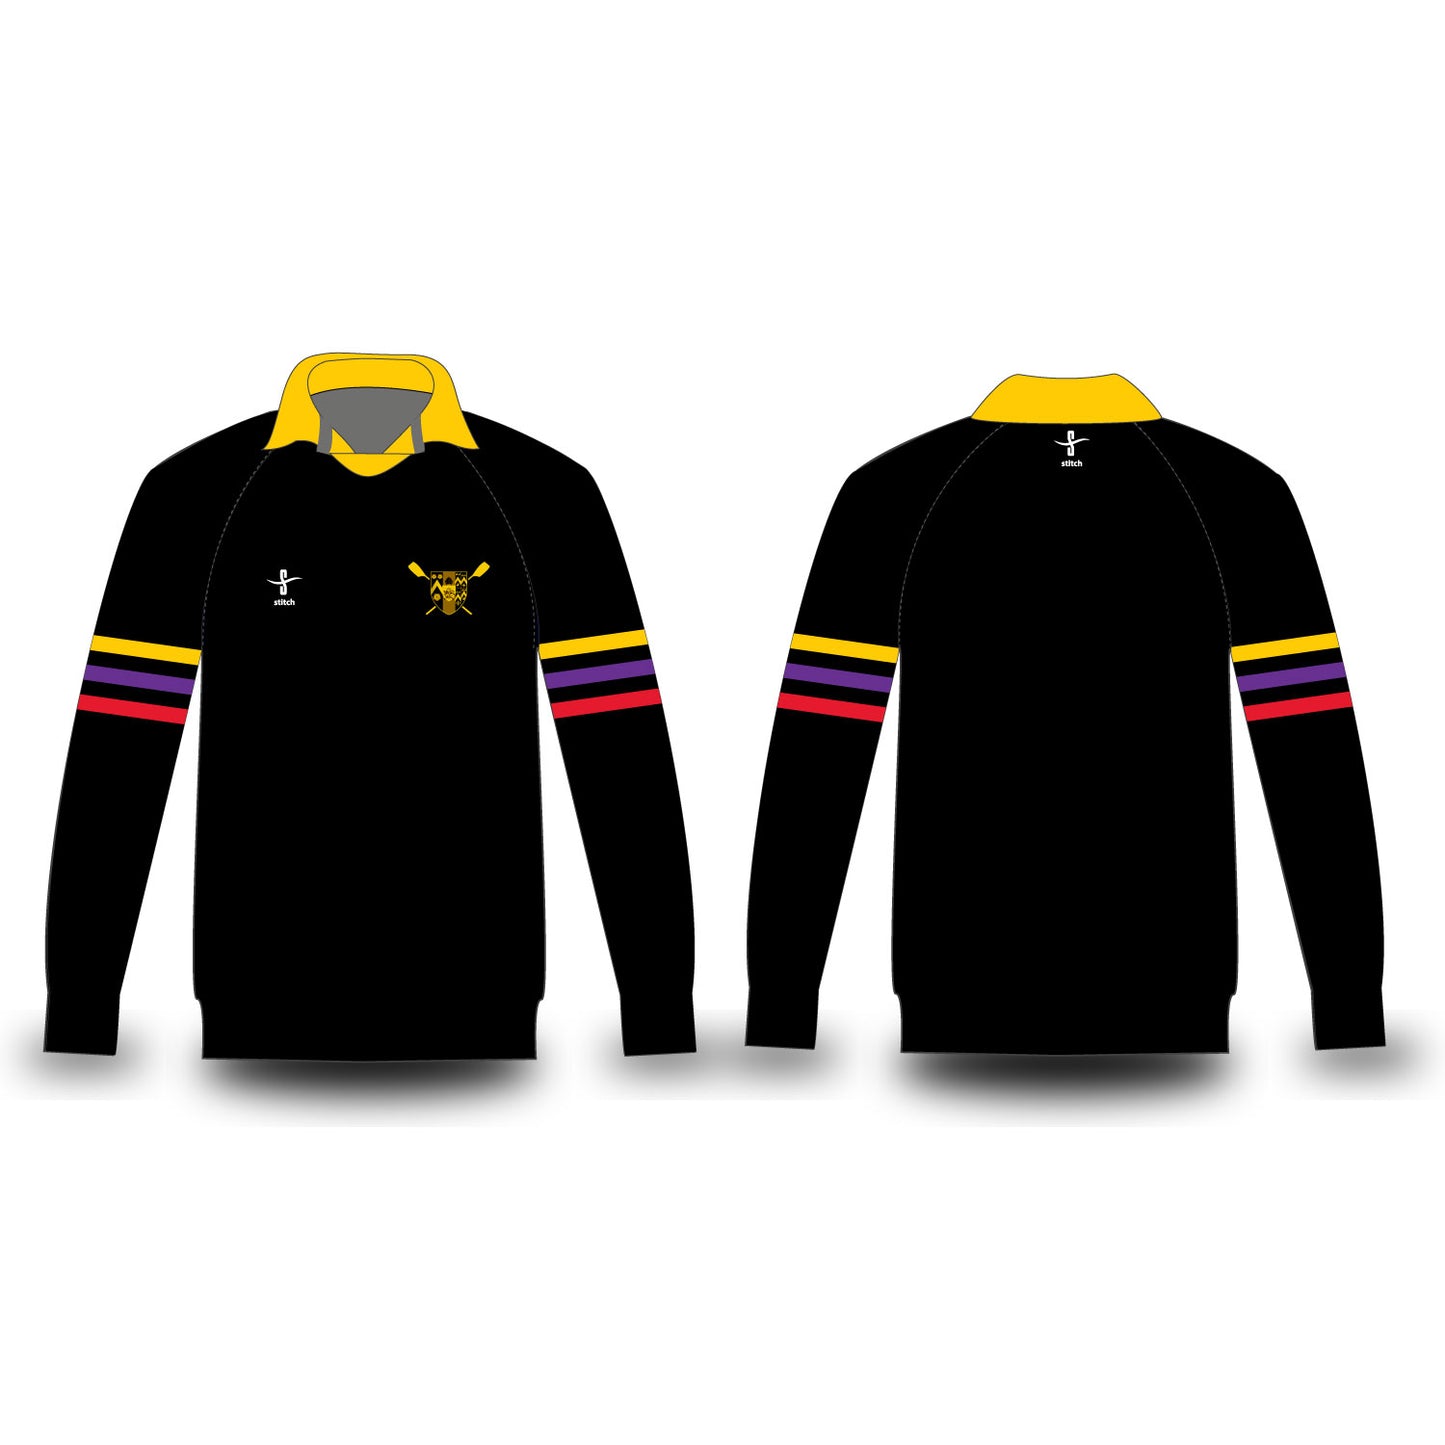 Brasenose College Rugby Shirt Option 3